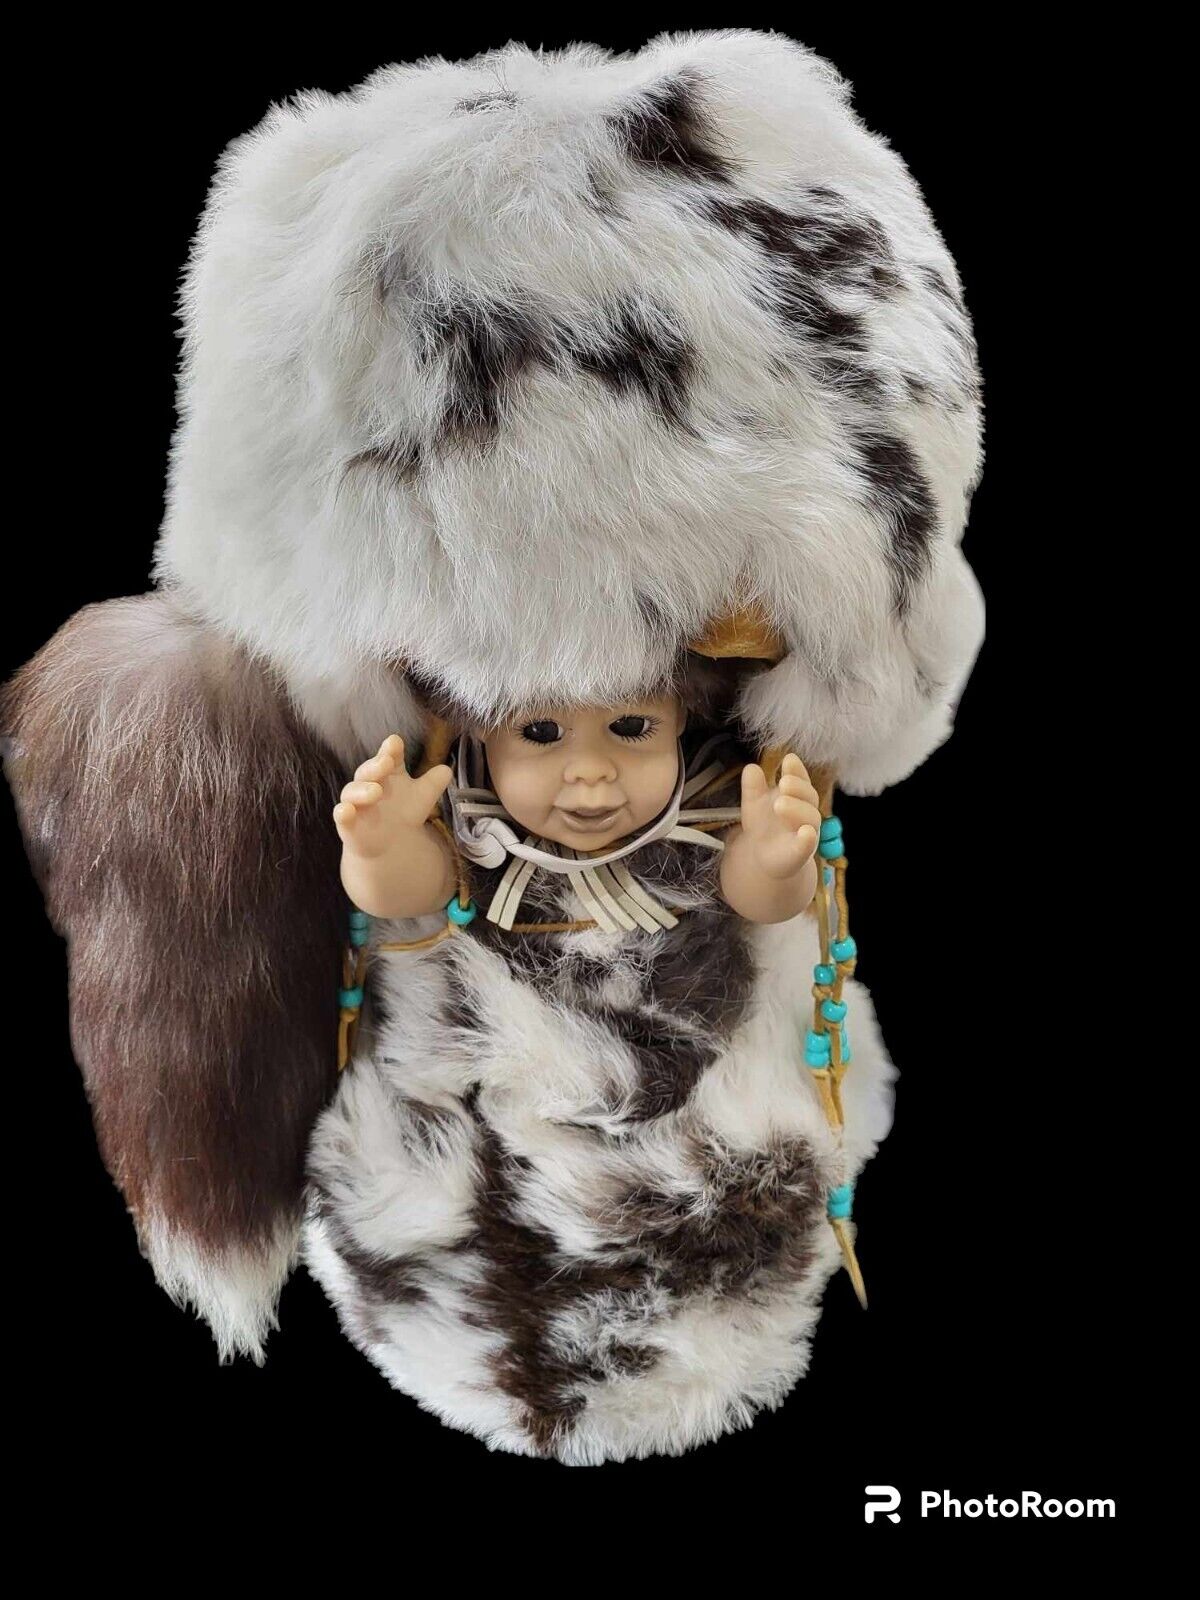 Rare North American Native Doll - Papoose board on back - wrapped in fur